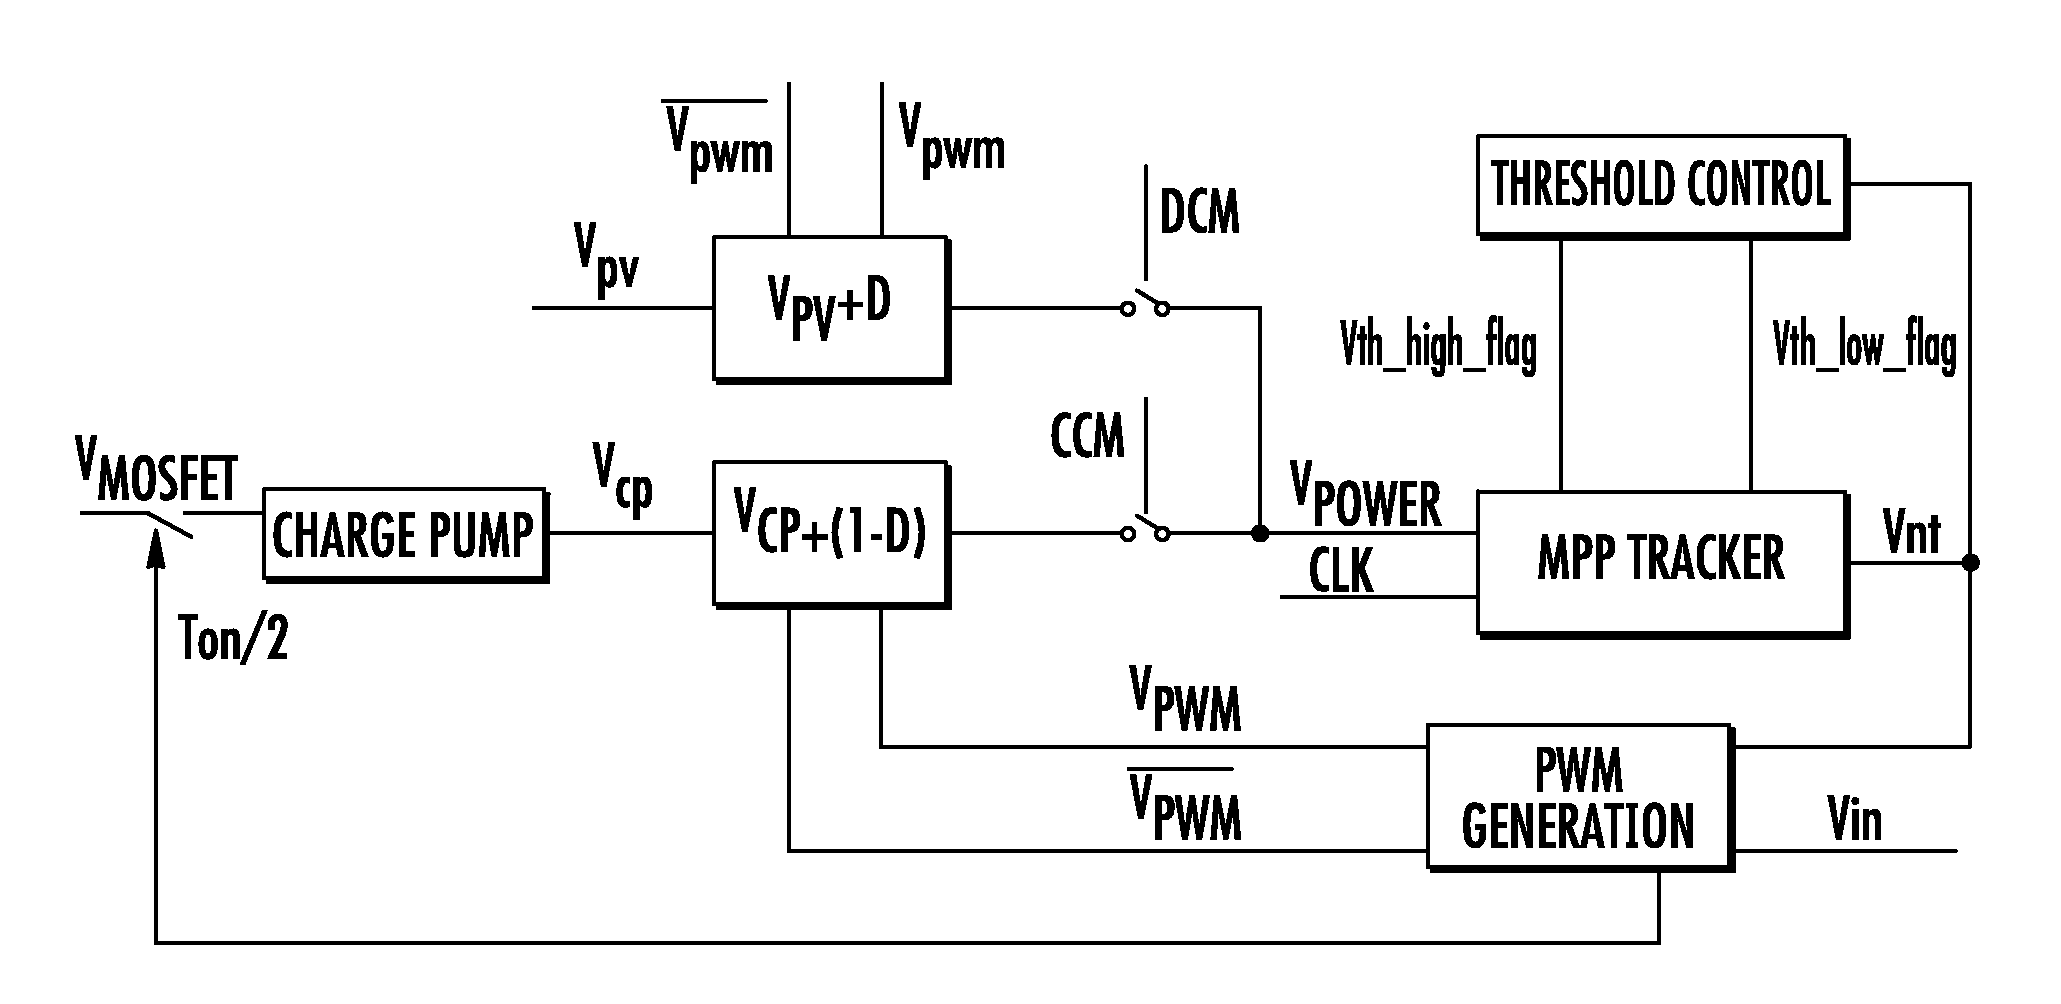 Analog MPPT circuit for photovoltaic power plant